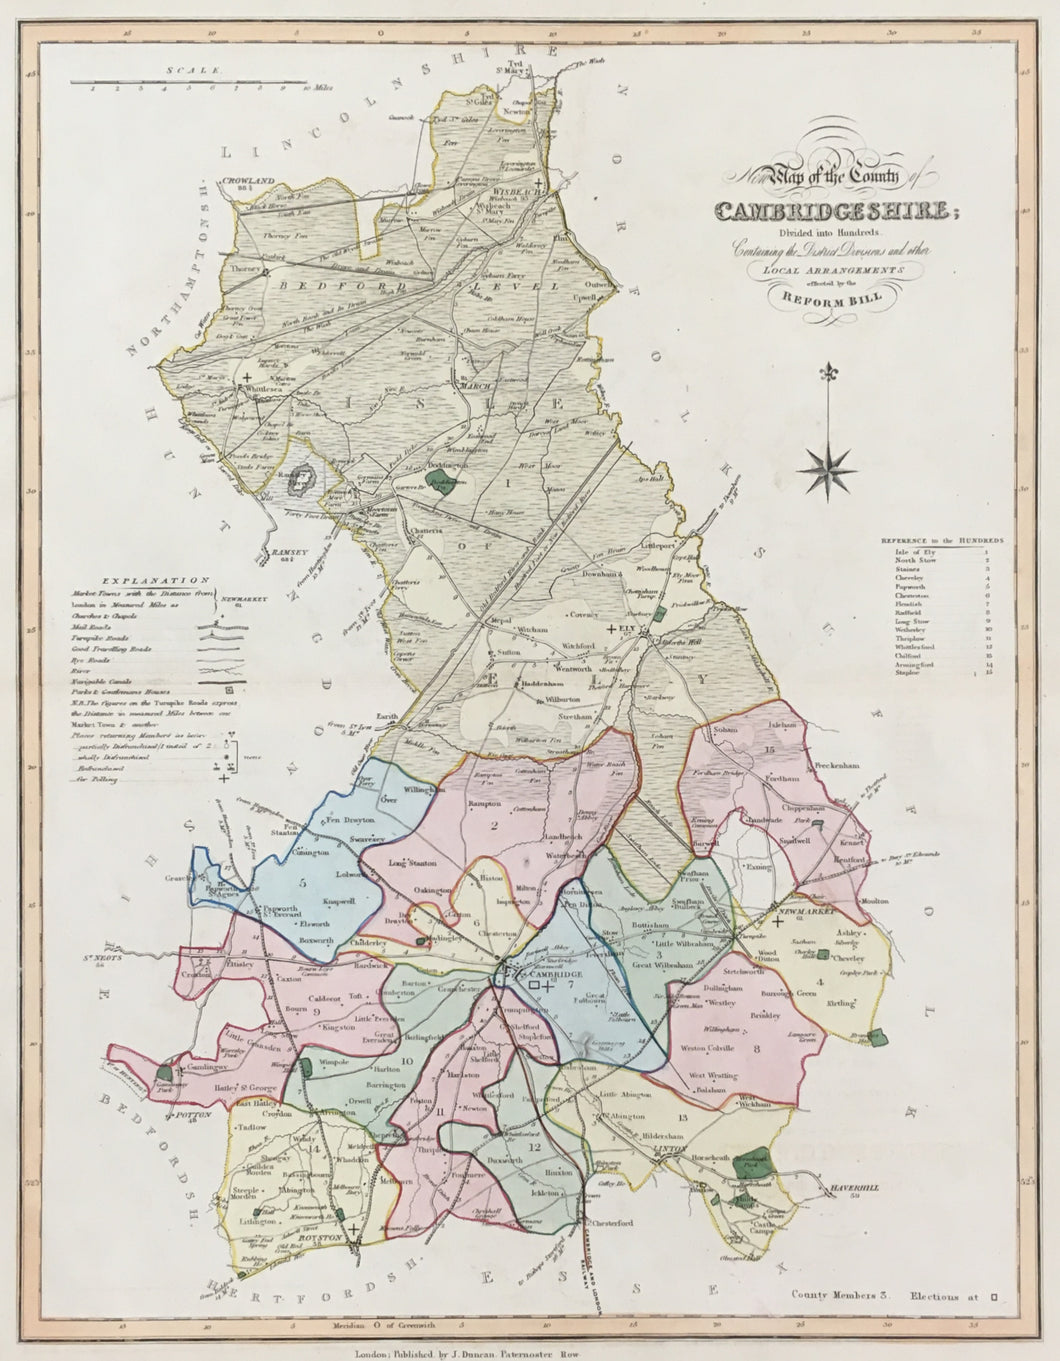 Ebden, William “New Map of the County of Cambridgeshire”